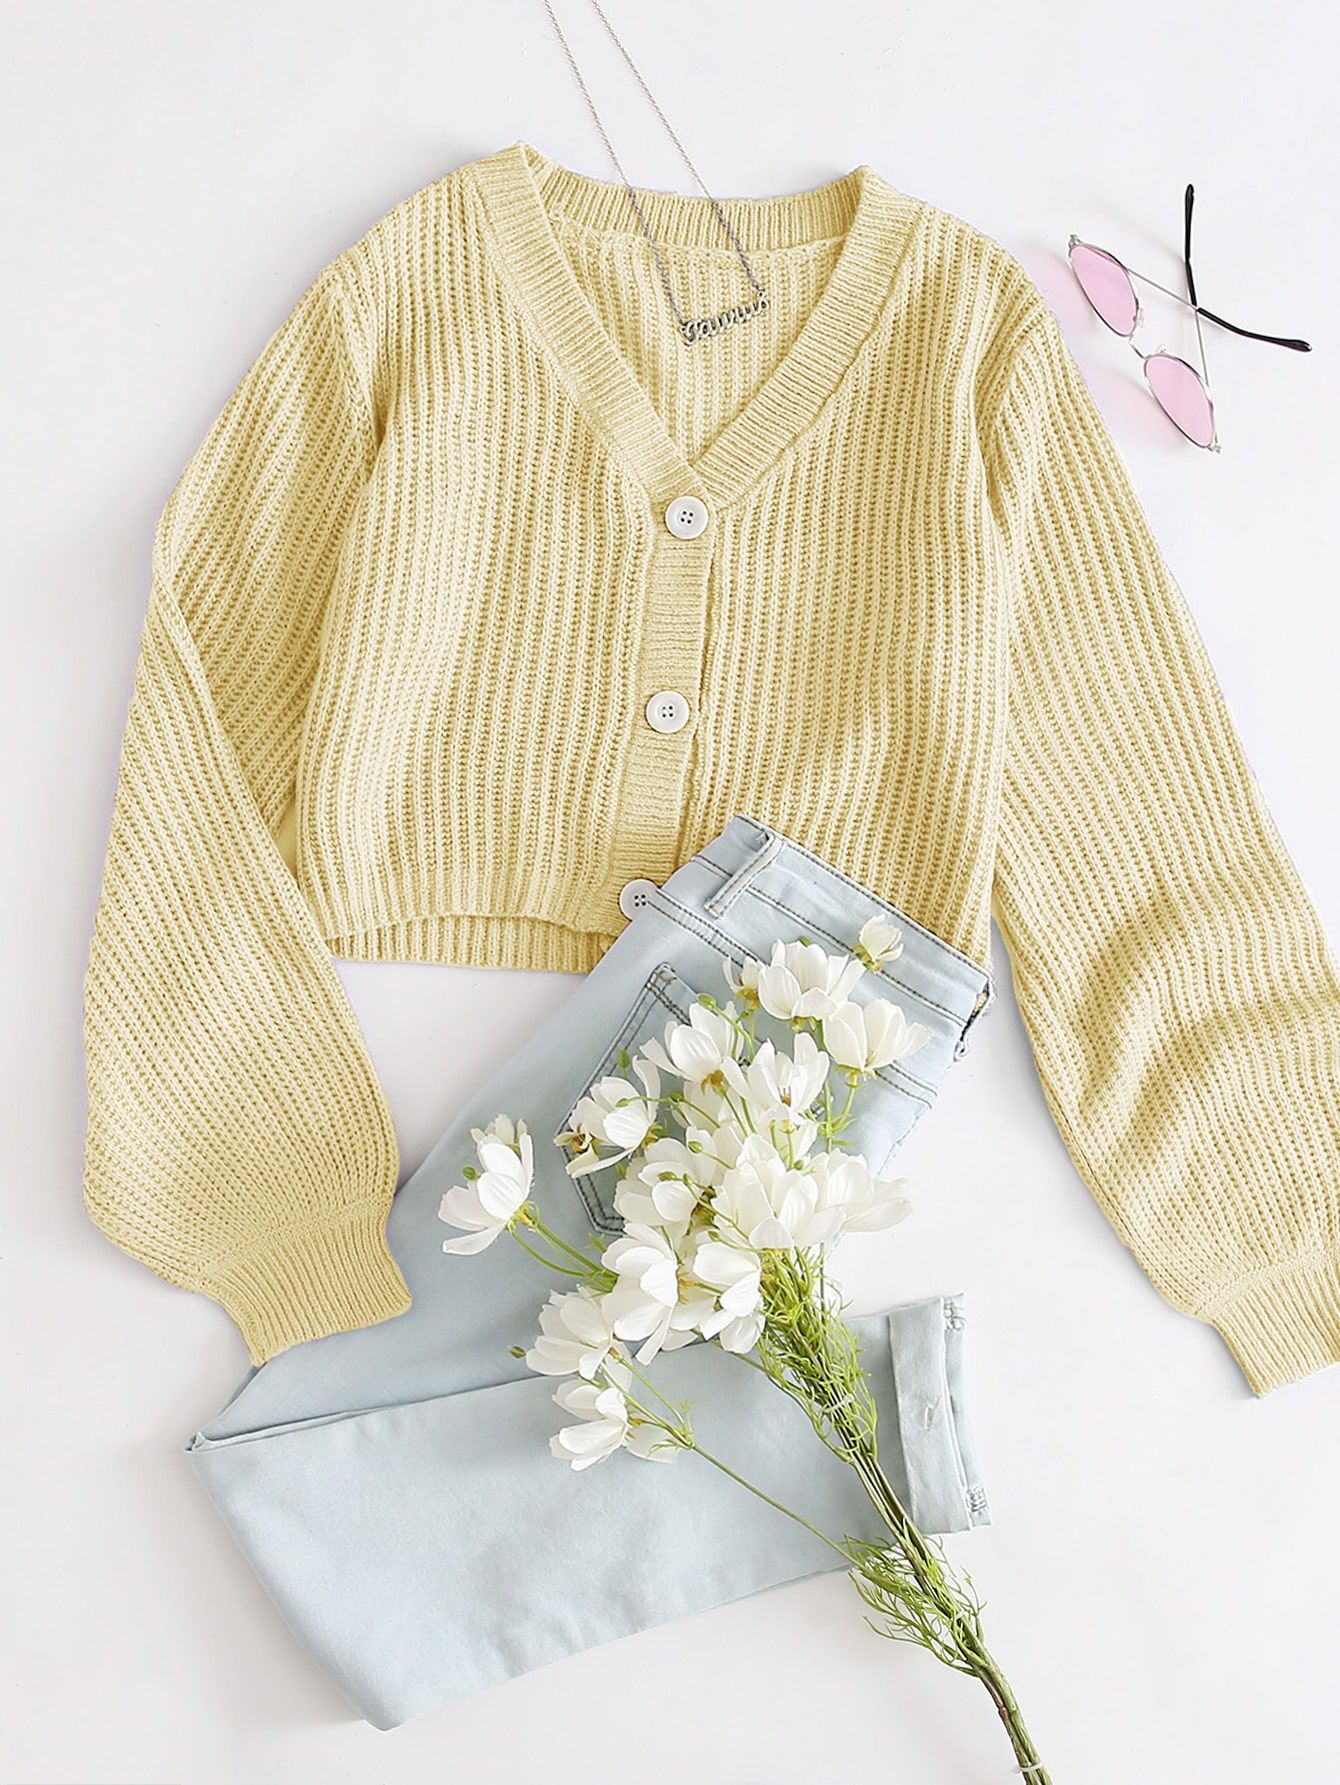 How to Wear Yellow Cardigan: 15 Cheerful & Refreshing Outfit Ideas